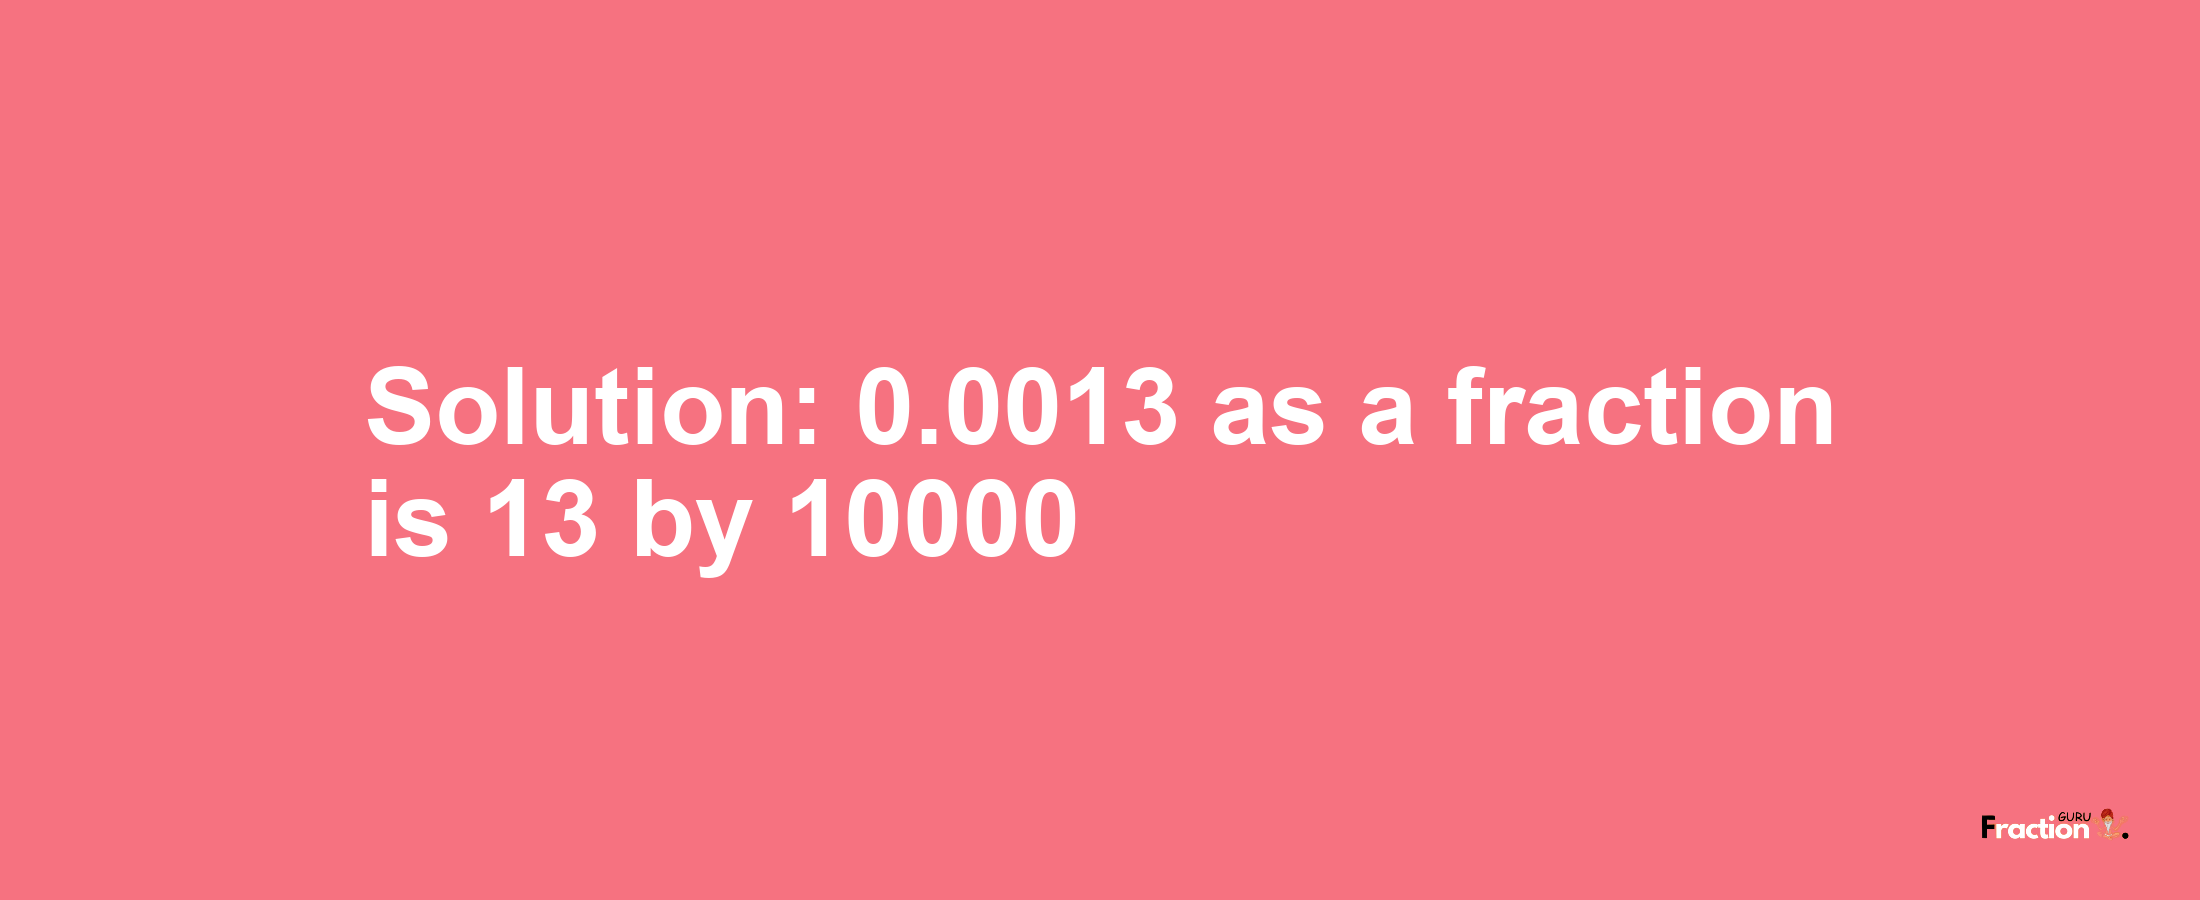 Solution:0.0013 as a fraction is 13/10000